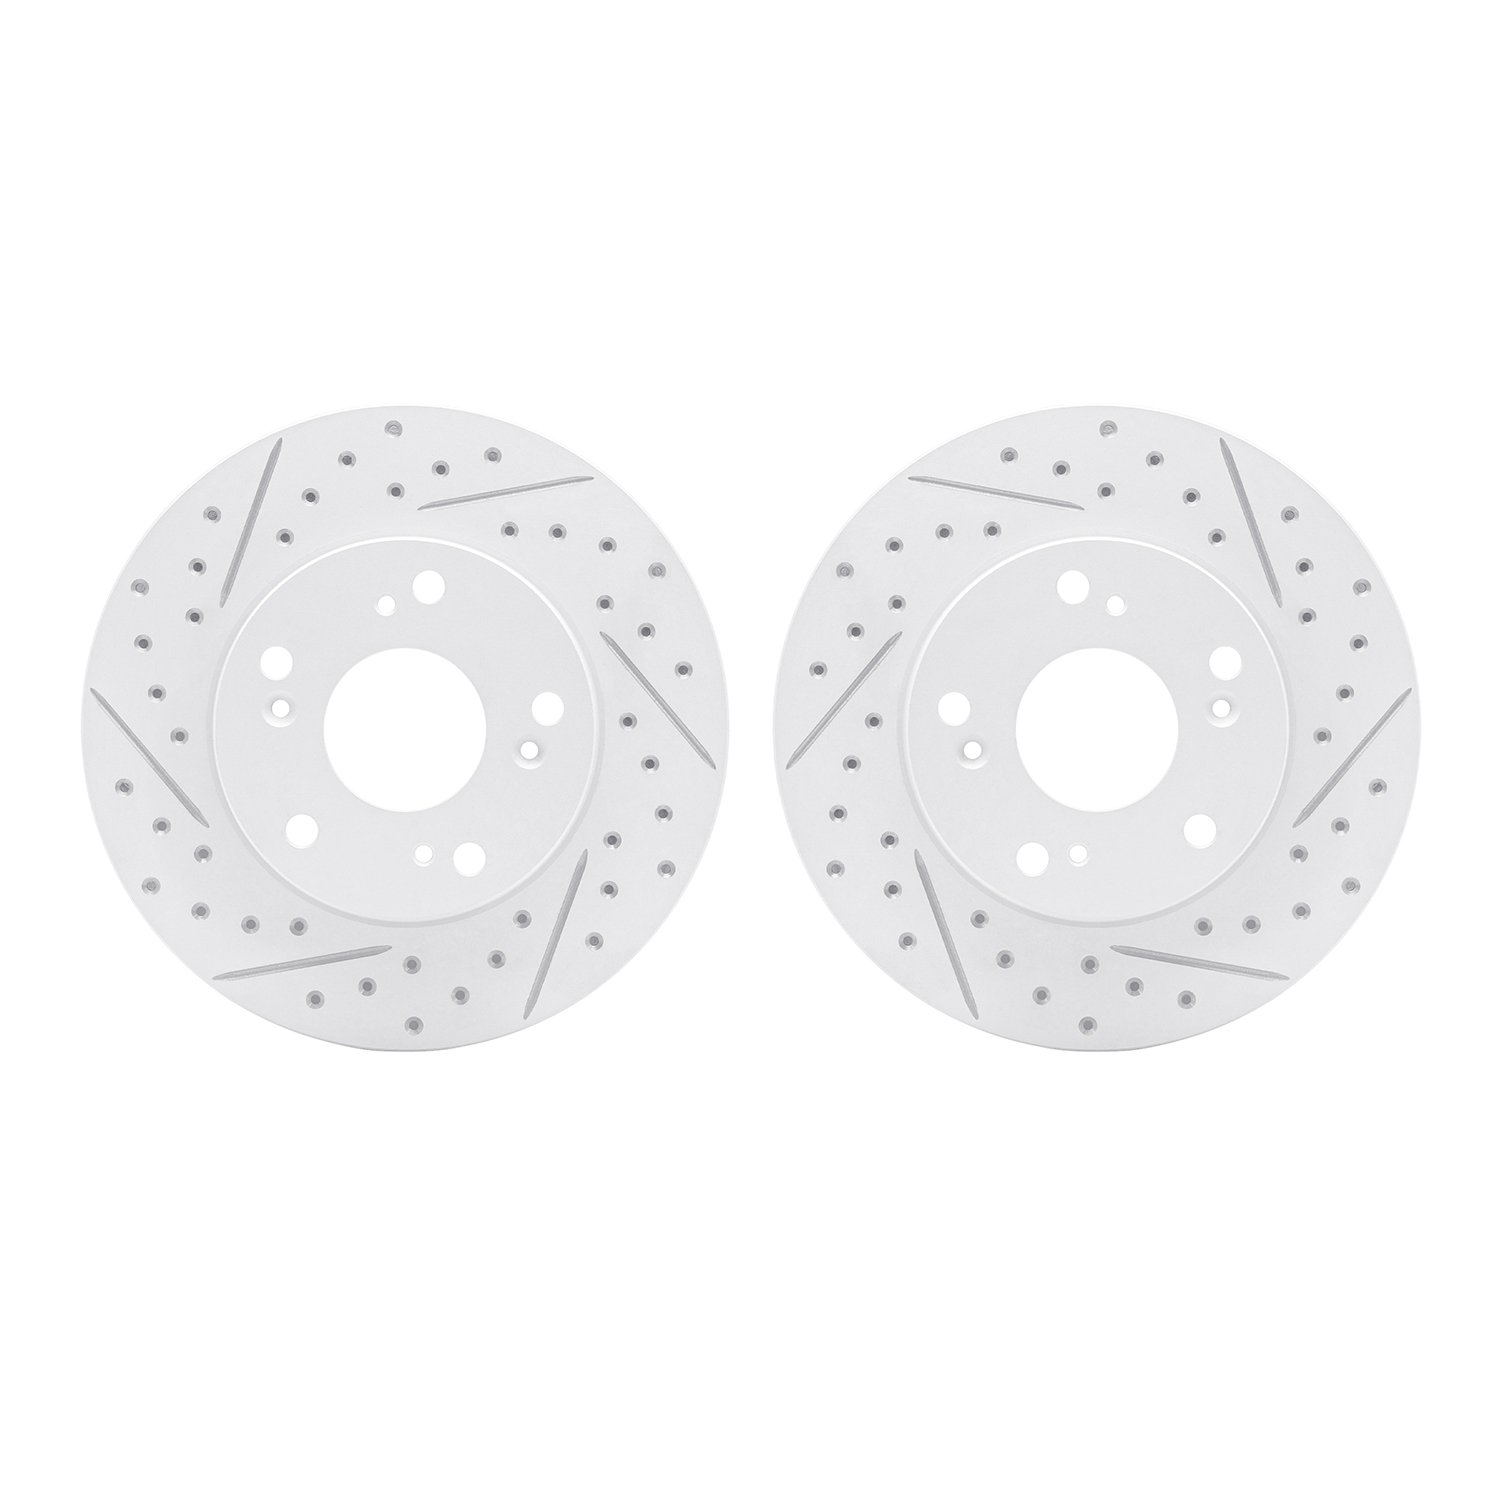 2002-59014 Geoperformance Drilled/Slotted Brake Rotors, 2002-2015 Acura/Honda, Position: Front